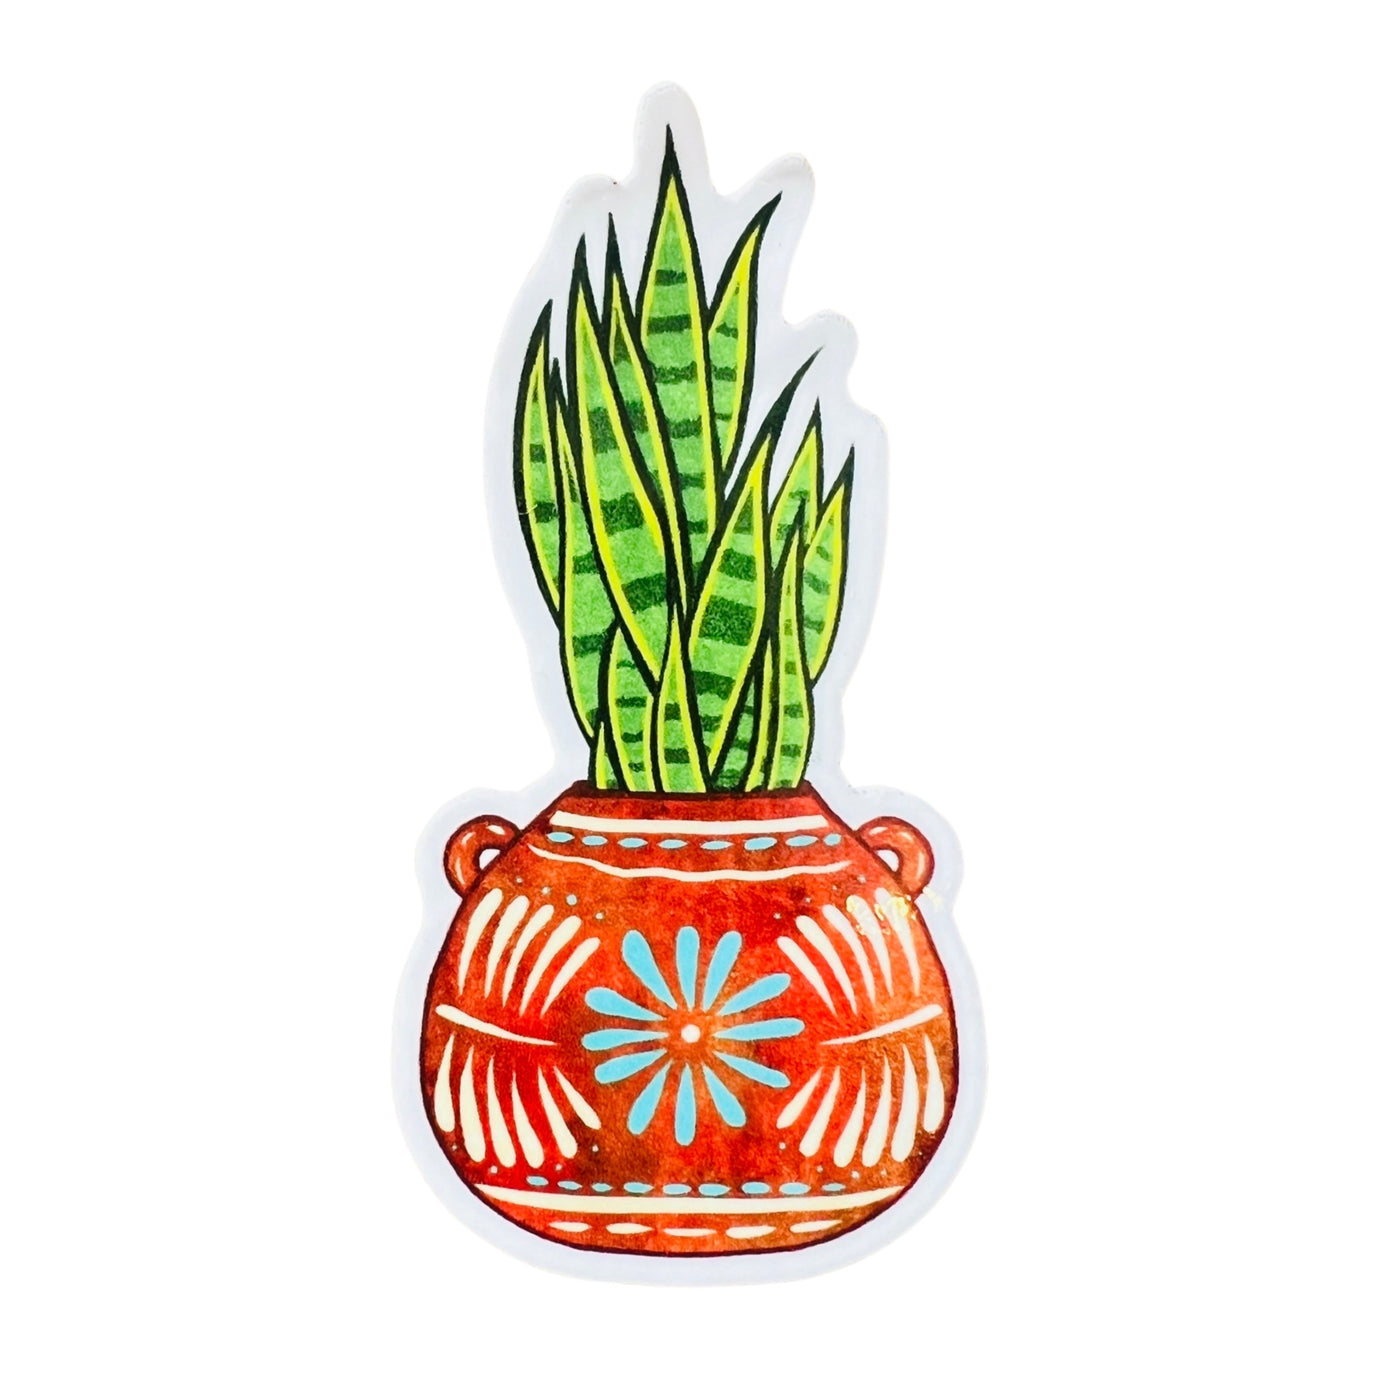 snake plant sticker that features a clay pot with a blue and white floral design.